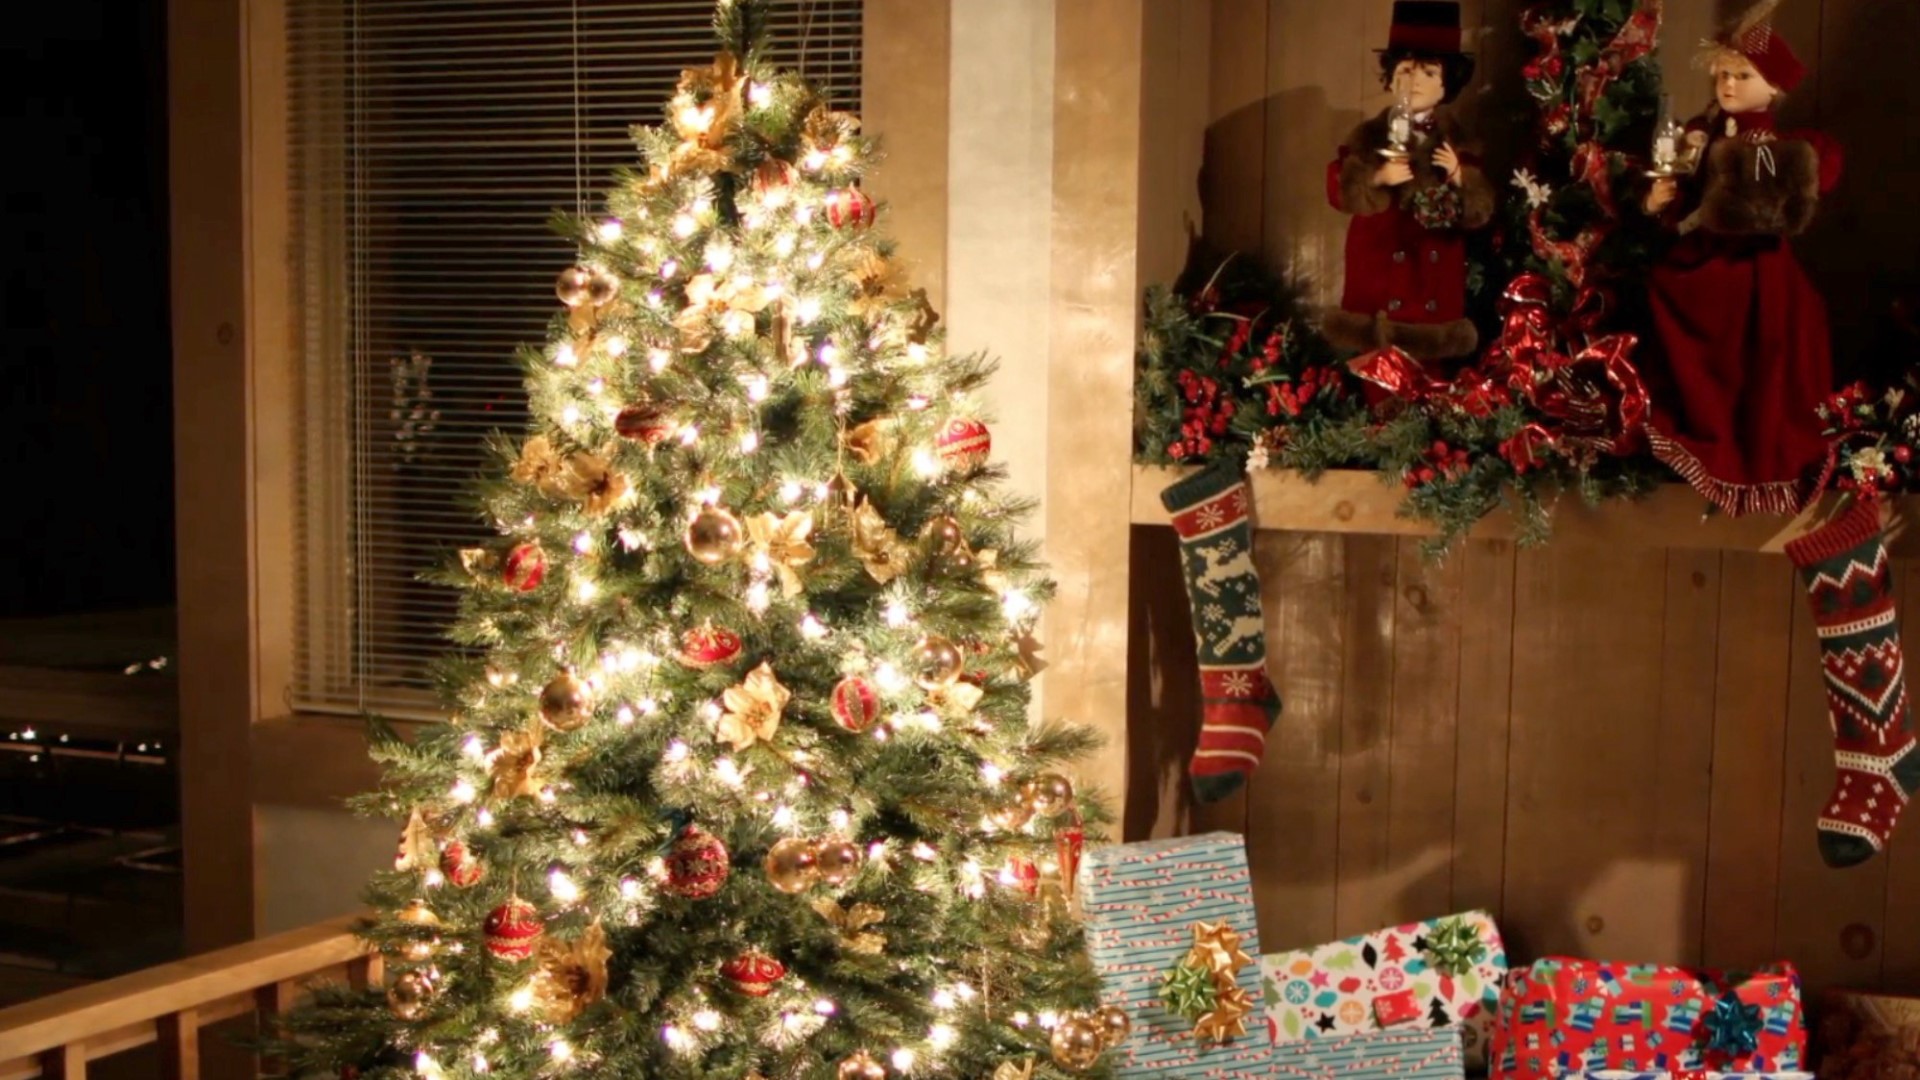 Whether to buy a real tree or a fake one? We break down some facts about what really matters when it comes to the festive season centerpiece. Buzz60's Taisha Henry has the story.